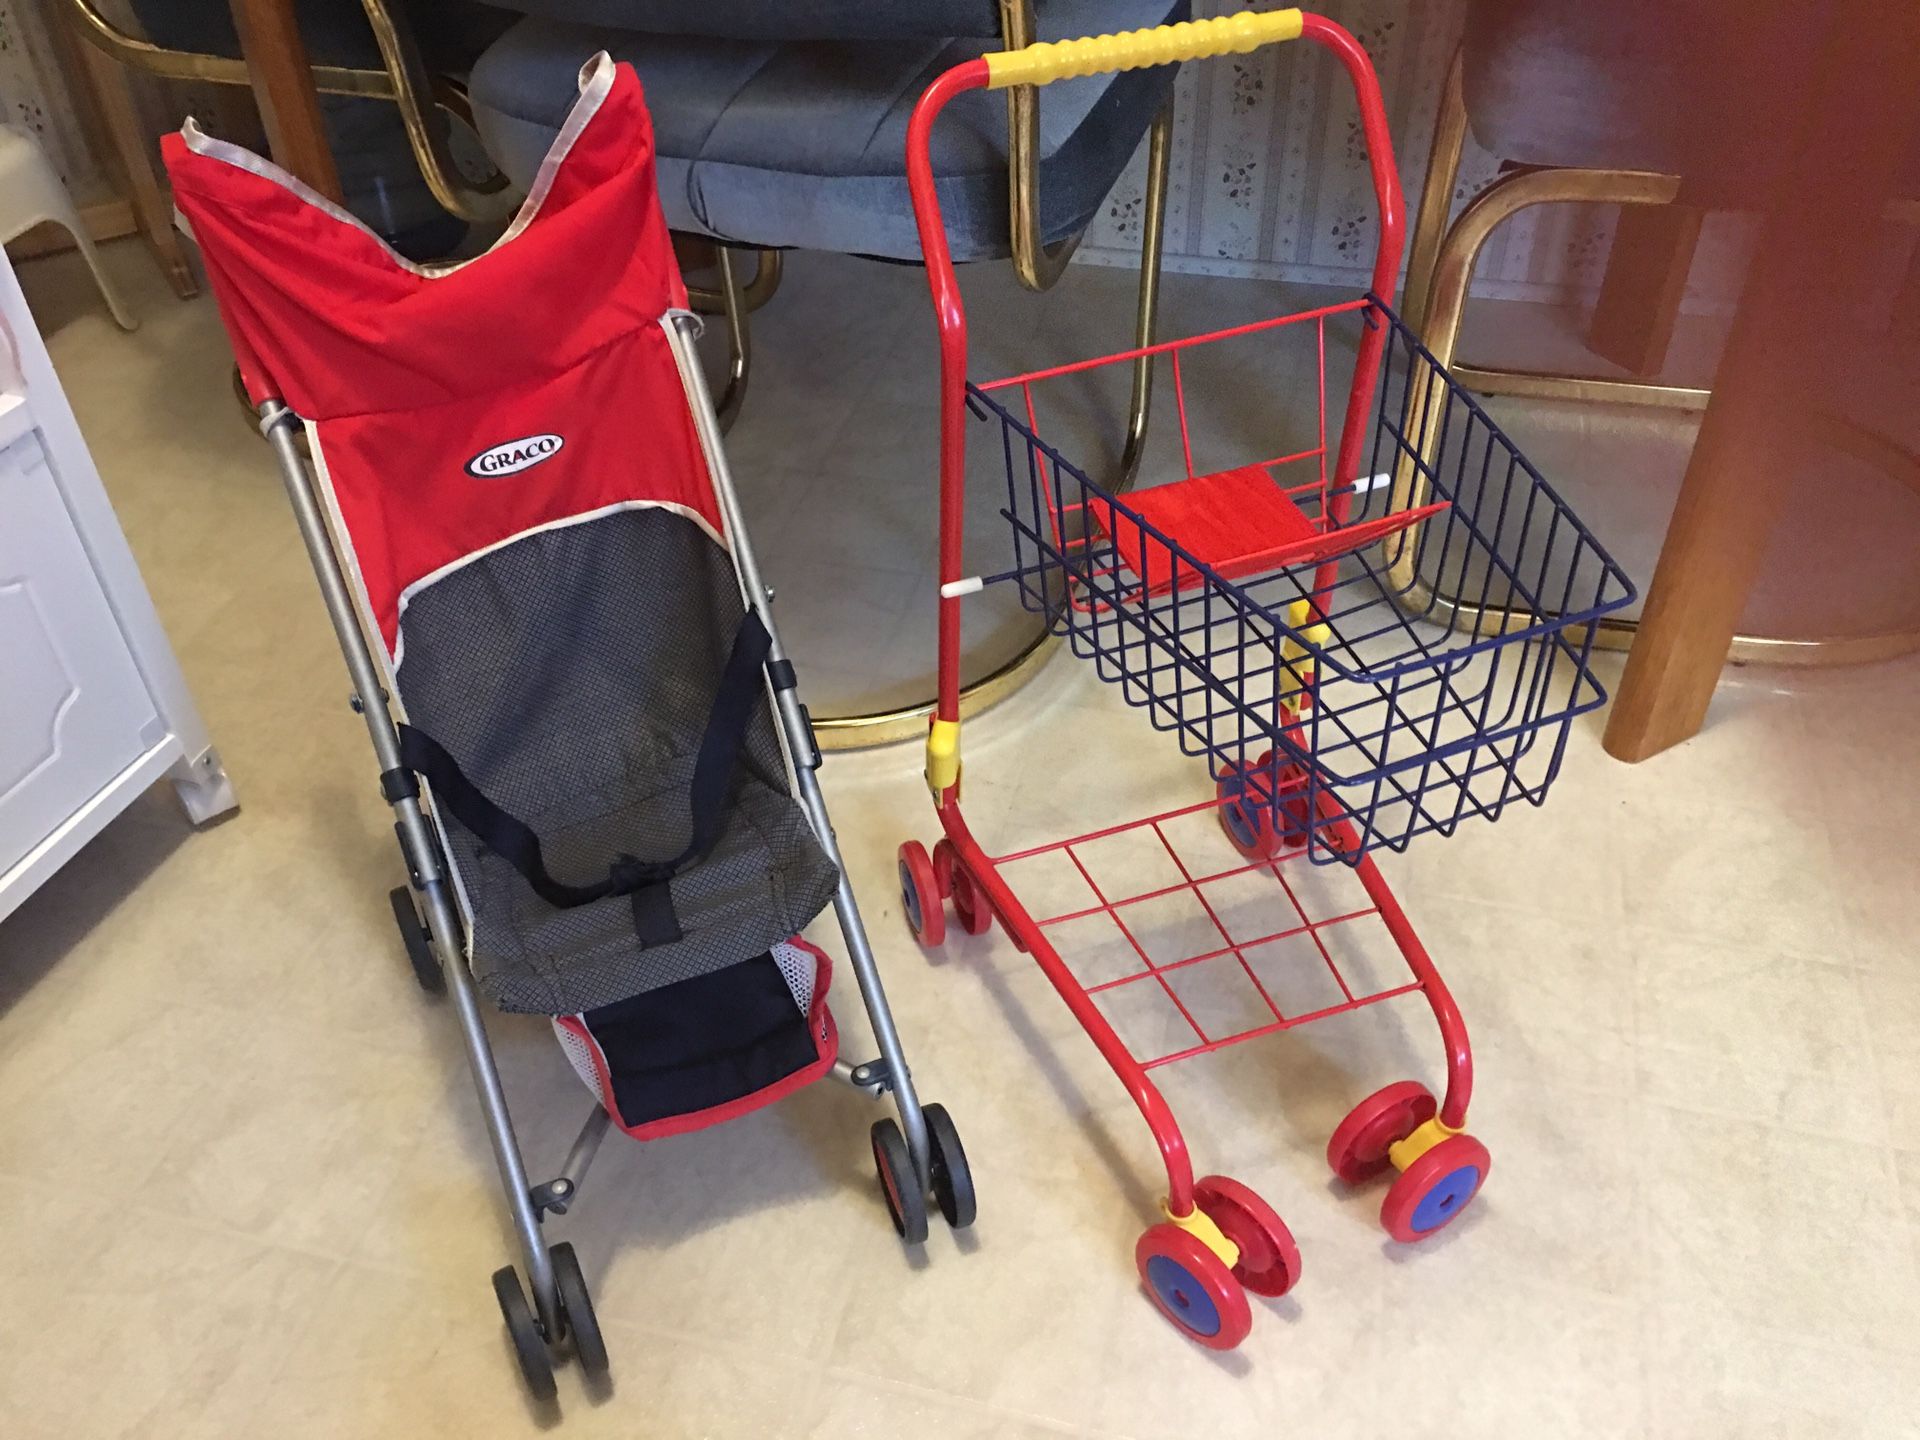 Baby stroller and shopping cart $10